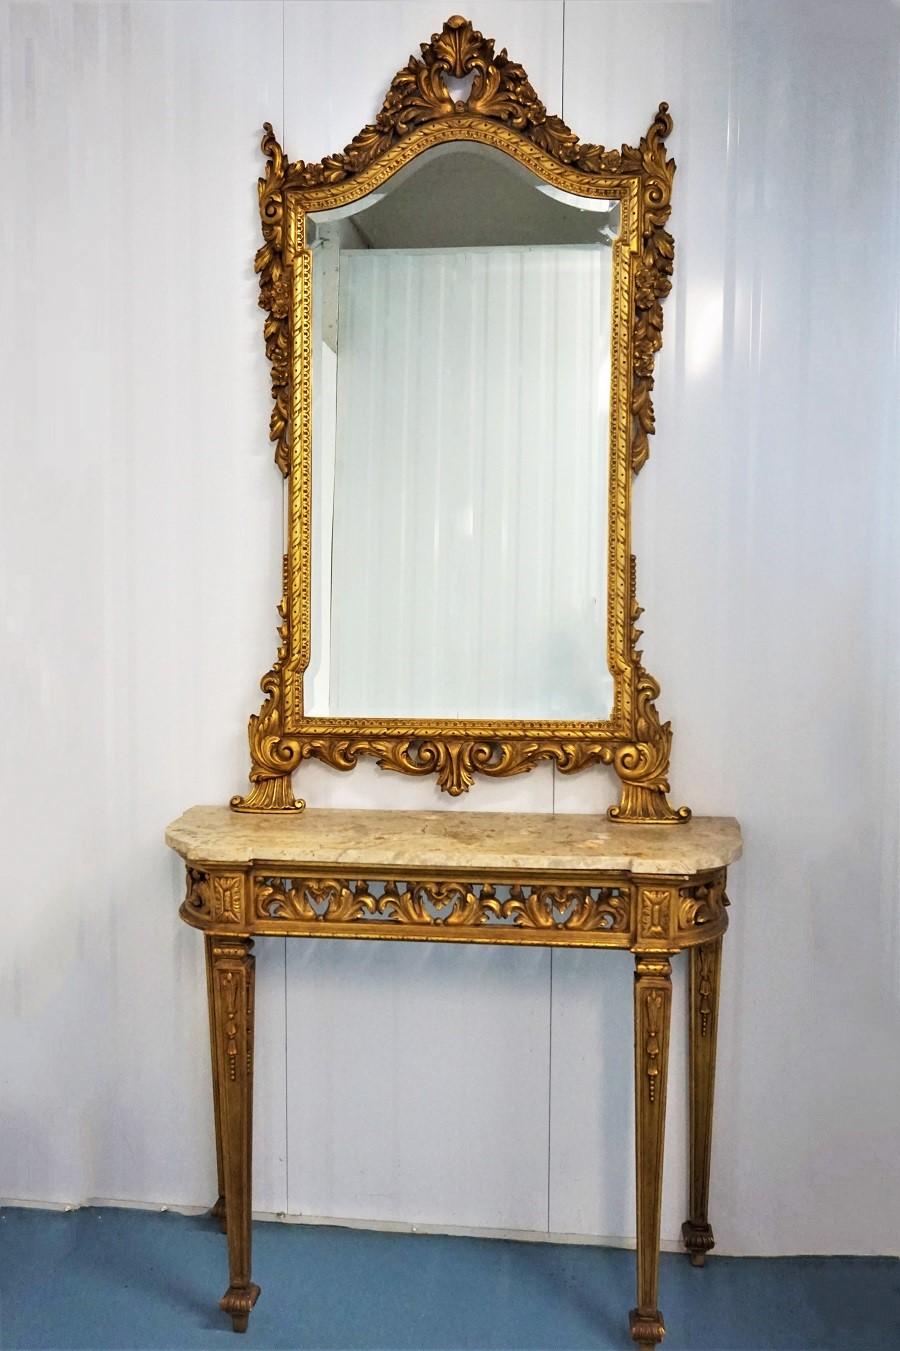 Italian late 19th century Louis XVI style giltwood console table and mirror. The table is finely hand carved in precise detail on four tapered and fluted legs with elegant foliate carvings. Above each leg finely carved rosettes. The frieze is